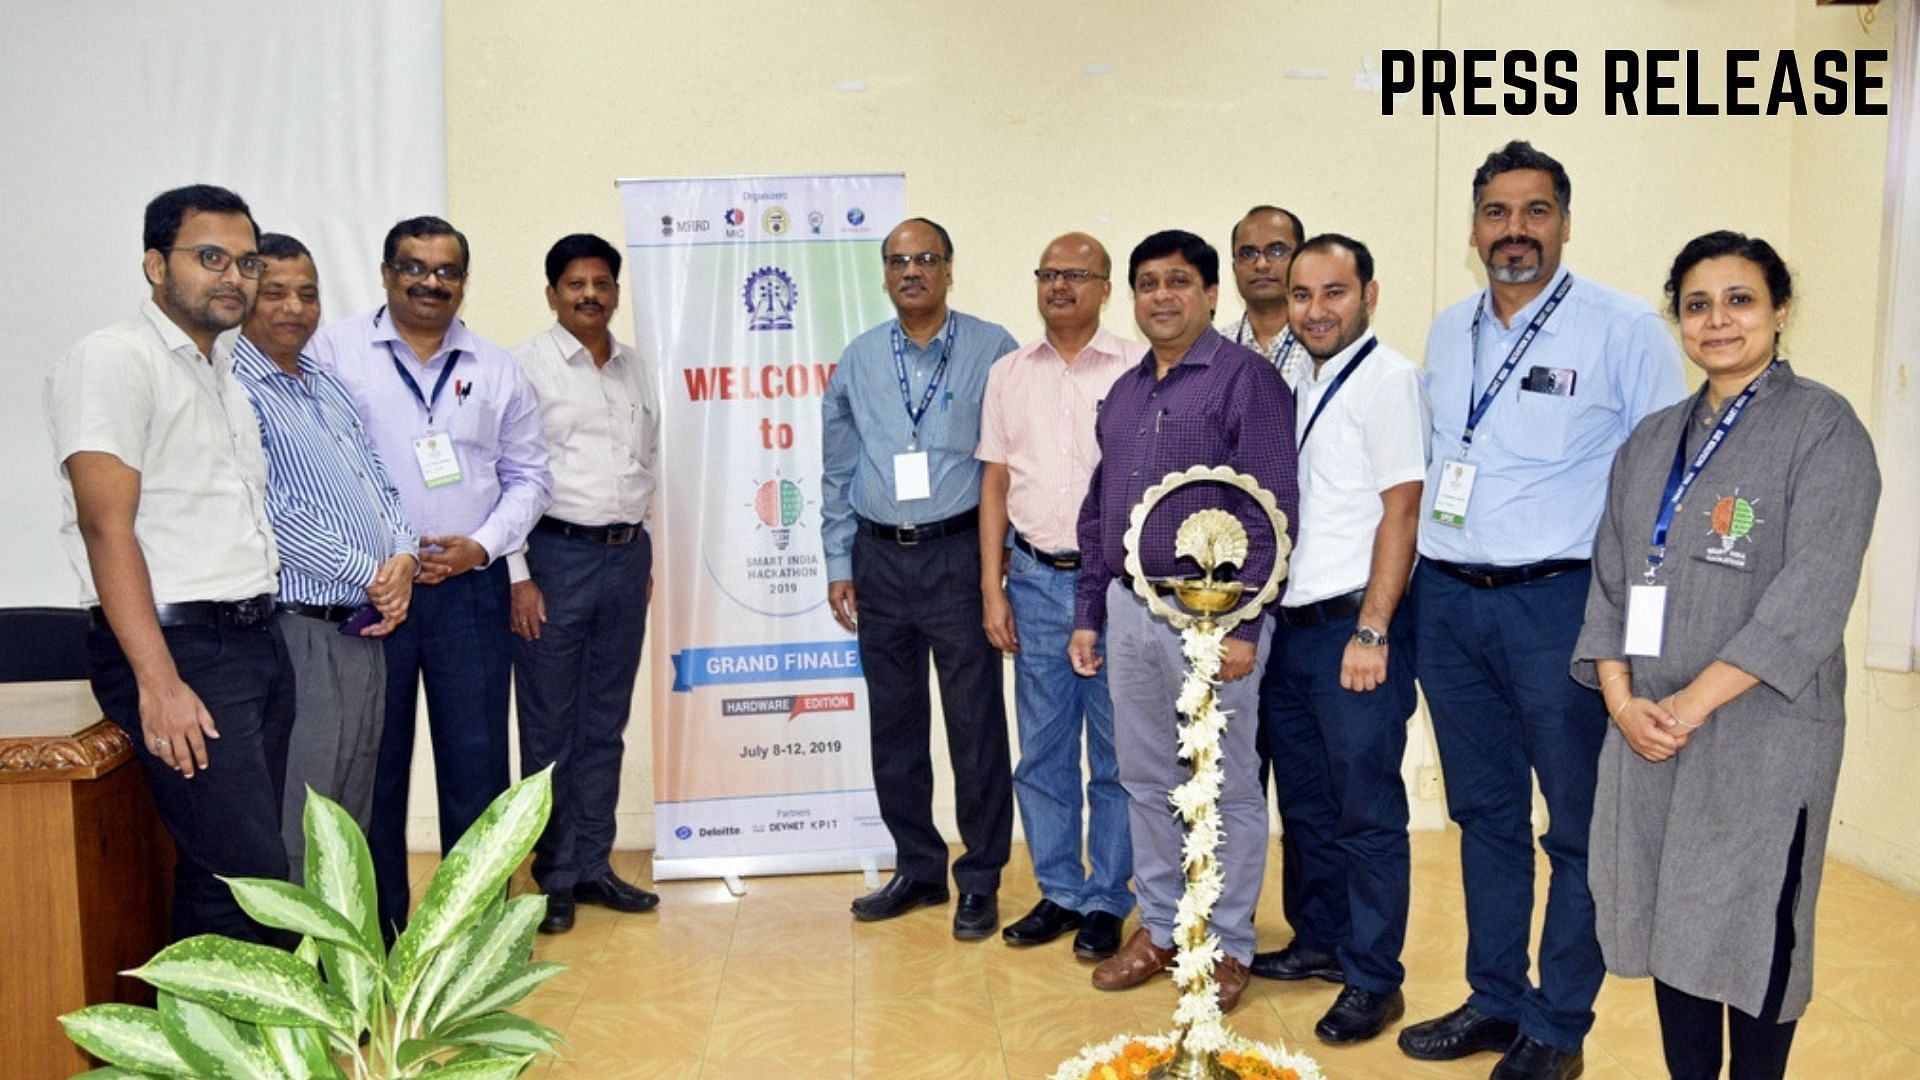 The week-long Hardware Edition of Smart India Hackathon 2019 started at IIT Kharagpur on July 8, 2019. 